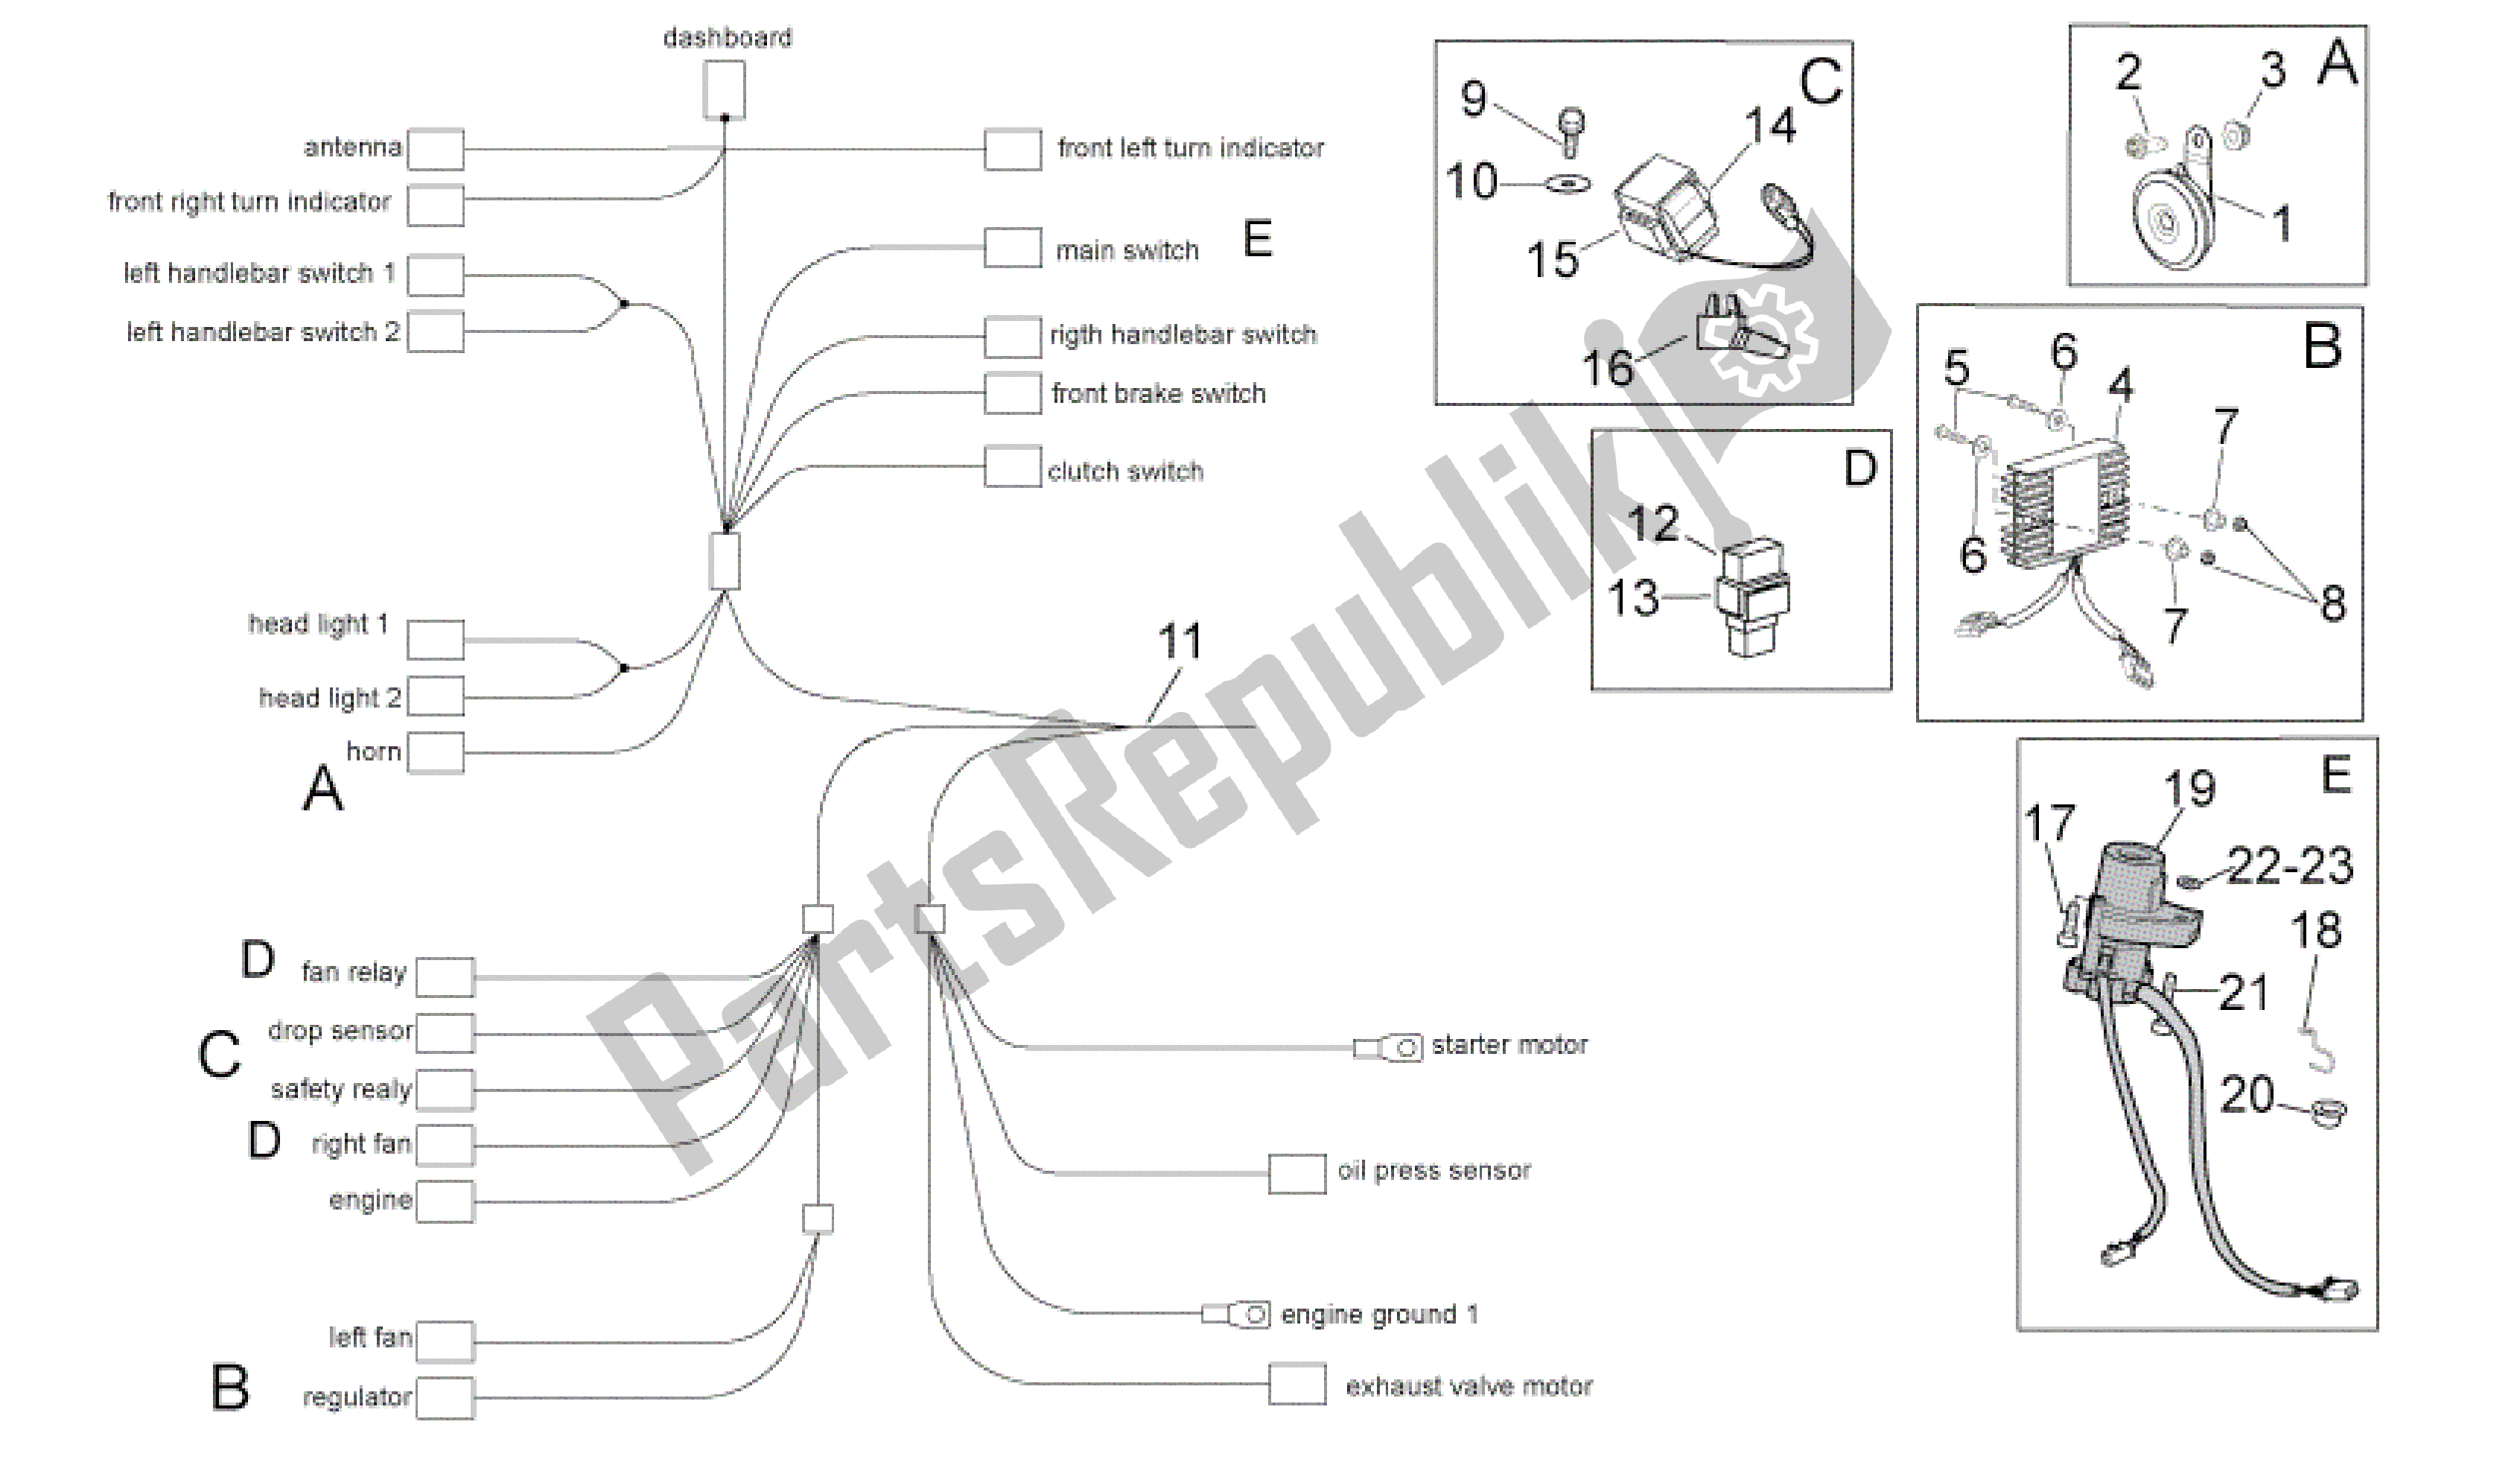 All parts for the Electrical System I of the Aprilia RSV4 Tuono V4 R Aprc ABS 1000 2014